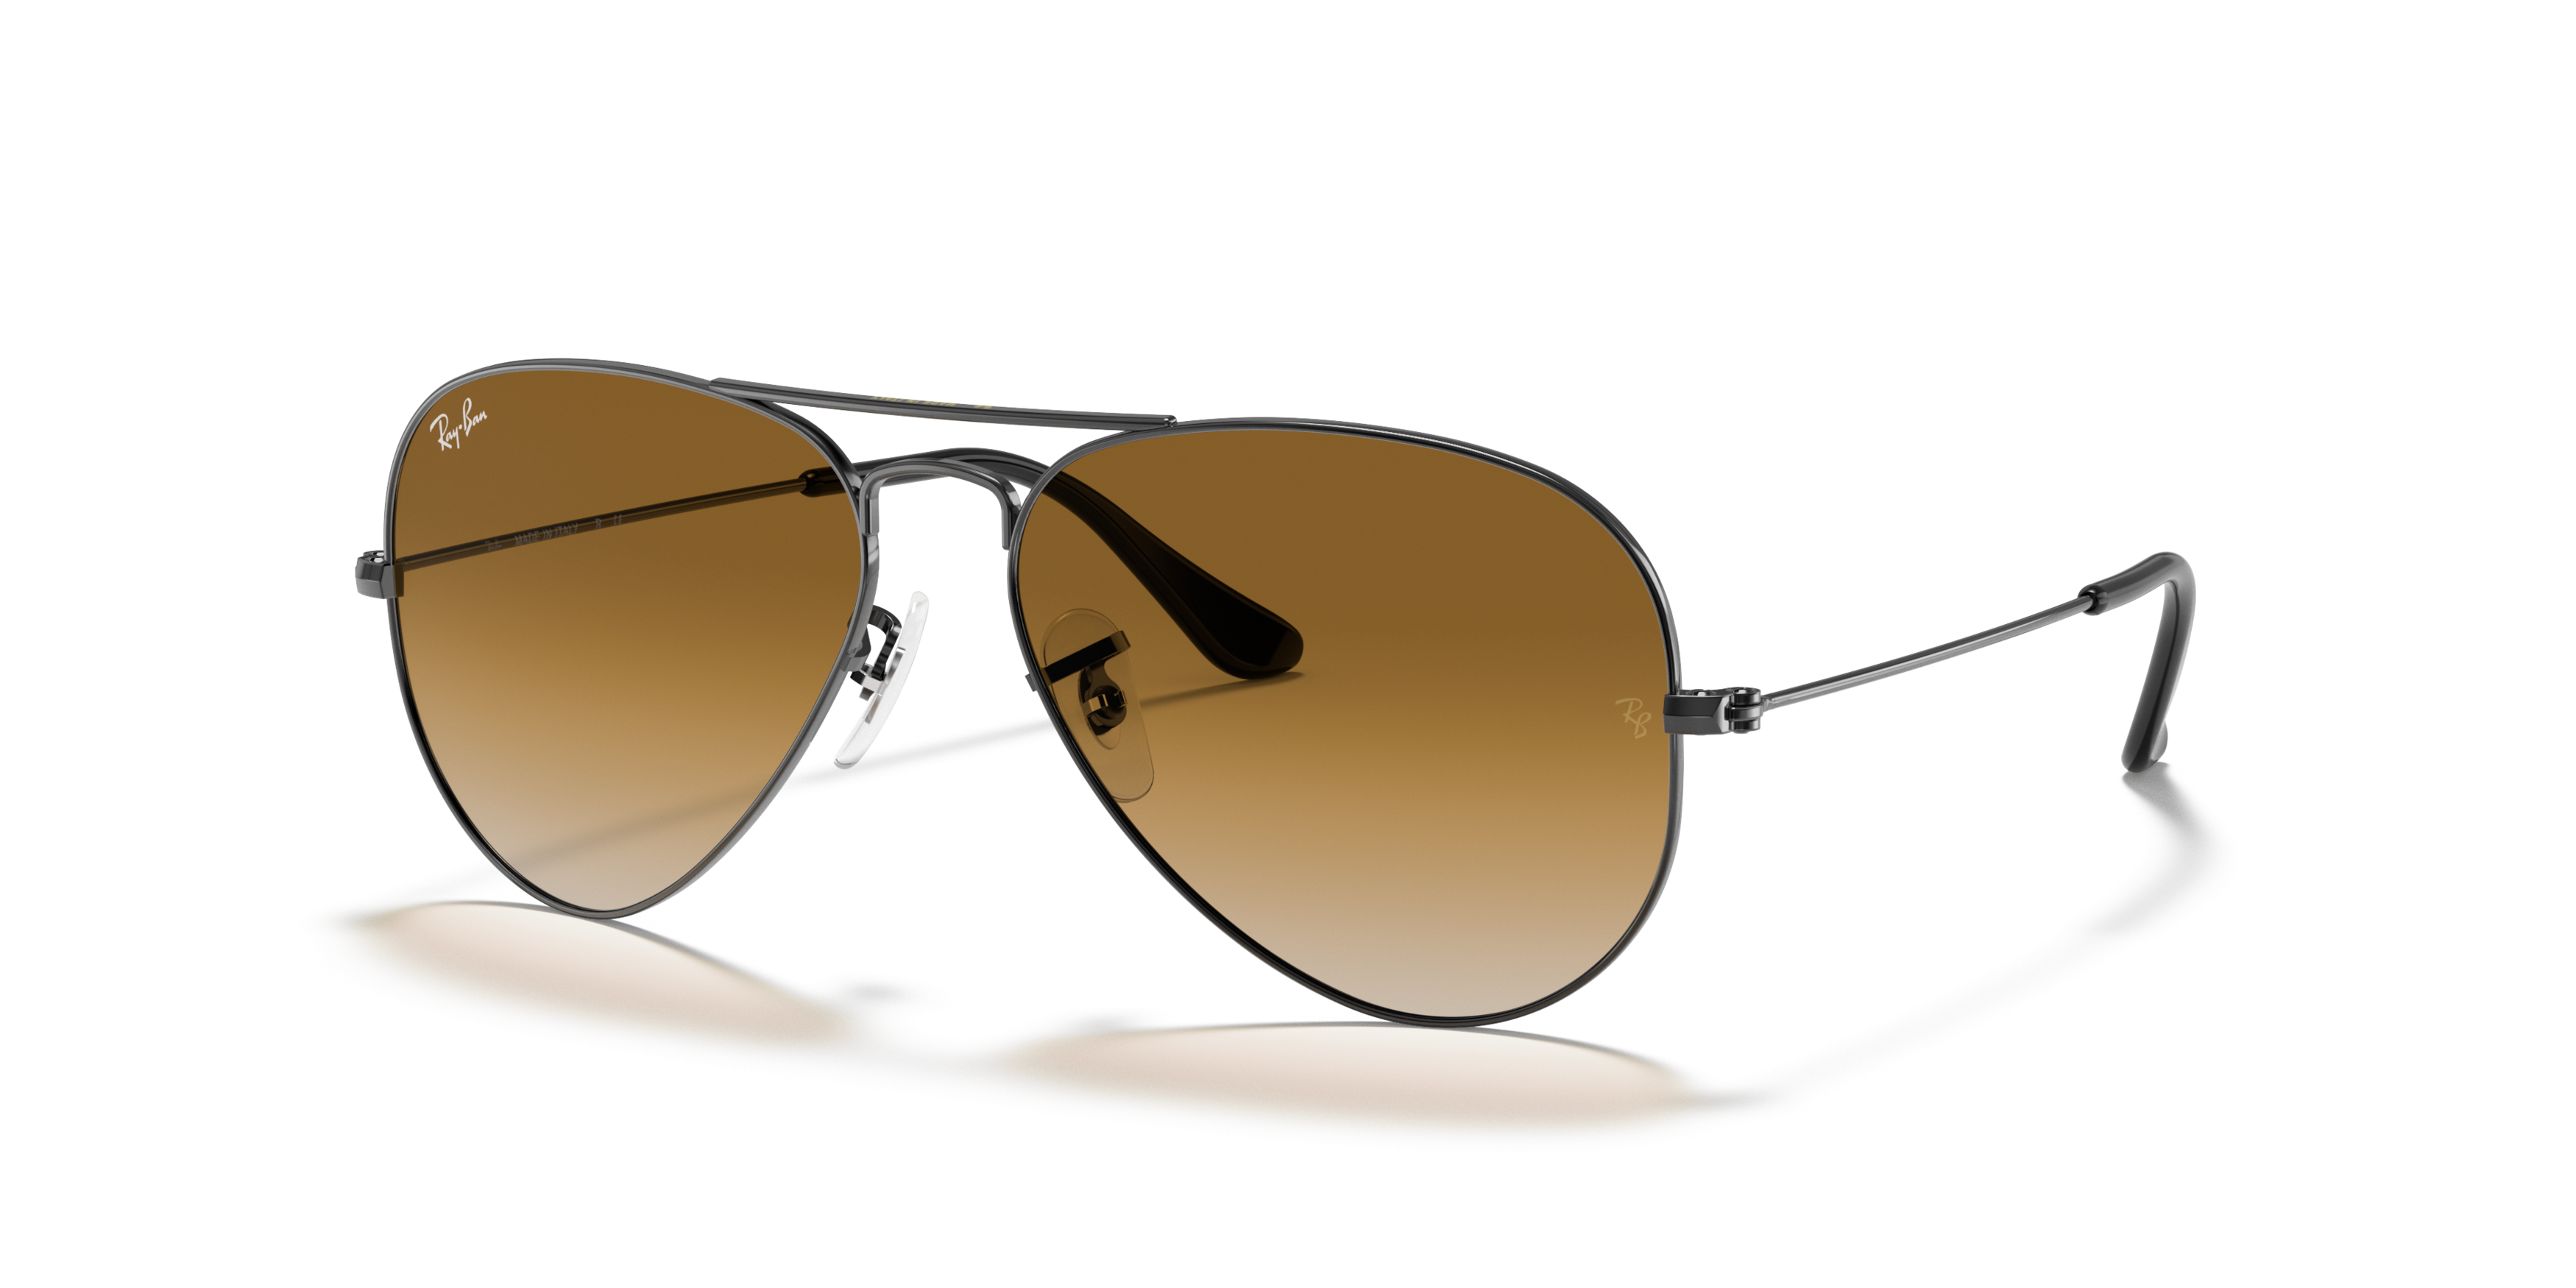 [products.image.angle_left01] Ray-Ban Aviator Gradient RB3025 004/51